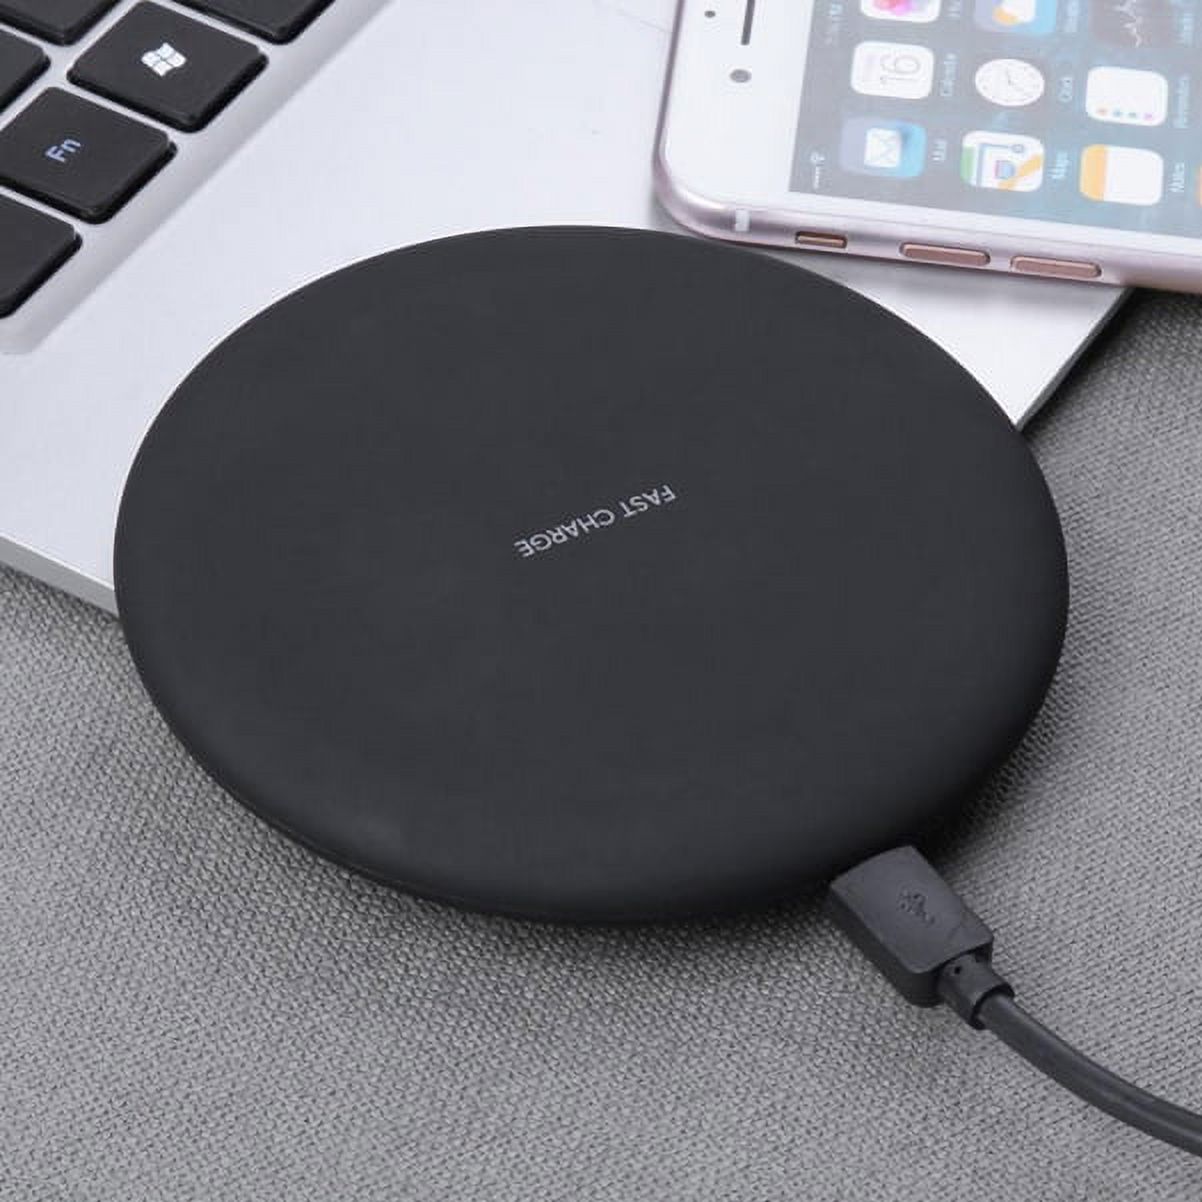 10W Fast Charge Wireless Charger Slim Charging Pad w 30W Adaptive Fast 2-Port Home Wall Plug Travel USB Charger A9D for Nokia 8, Lumia 930 920 1520 1020 - Razer Phone 2 - Samsung Galaxy S9+ S9 - image 2 of 11